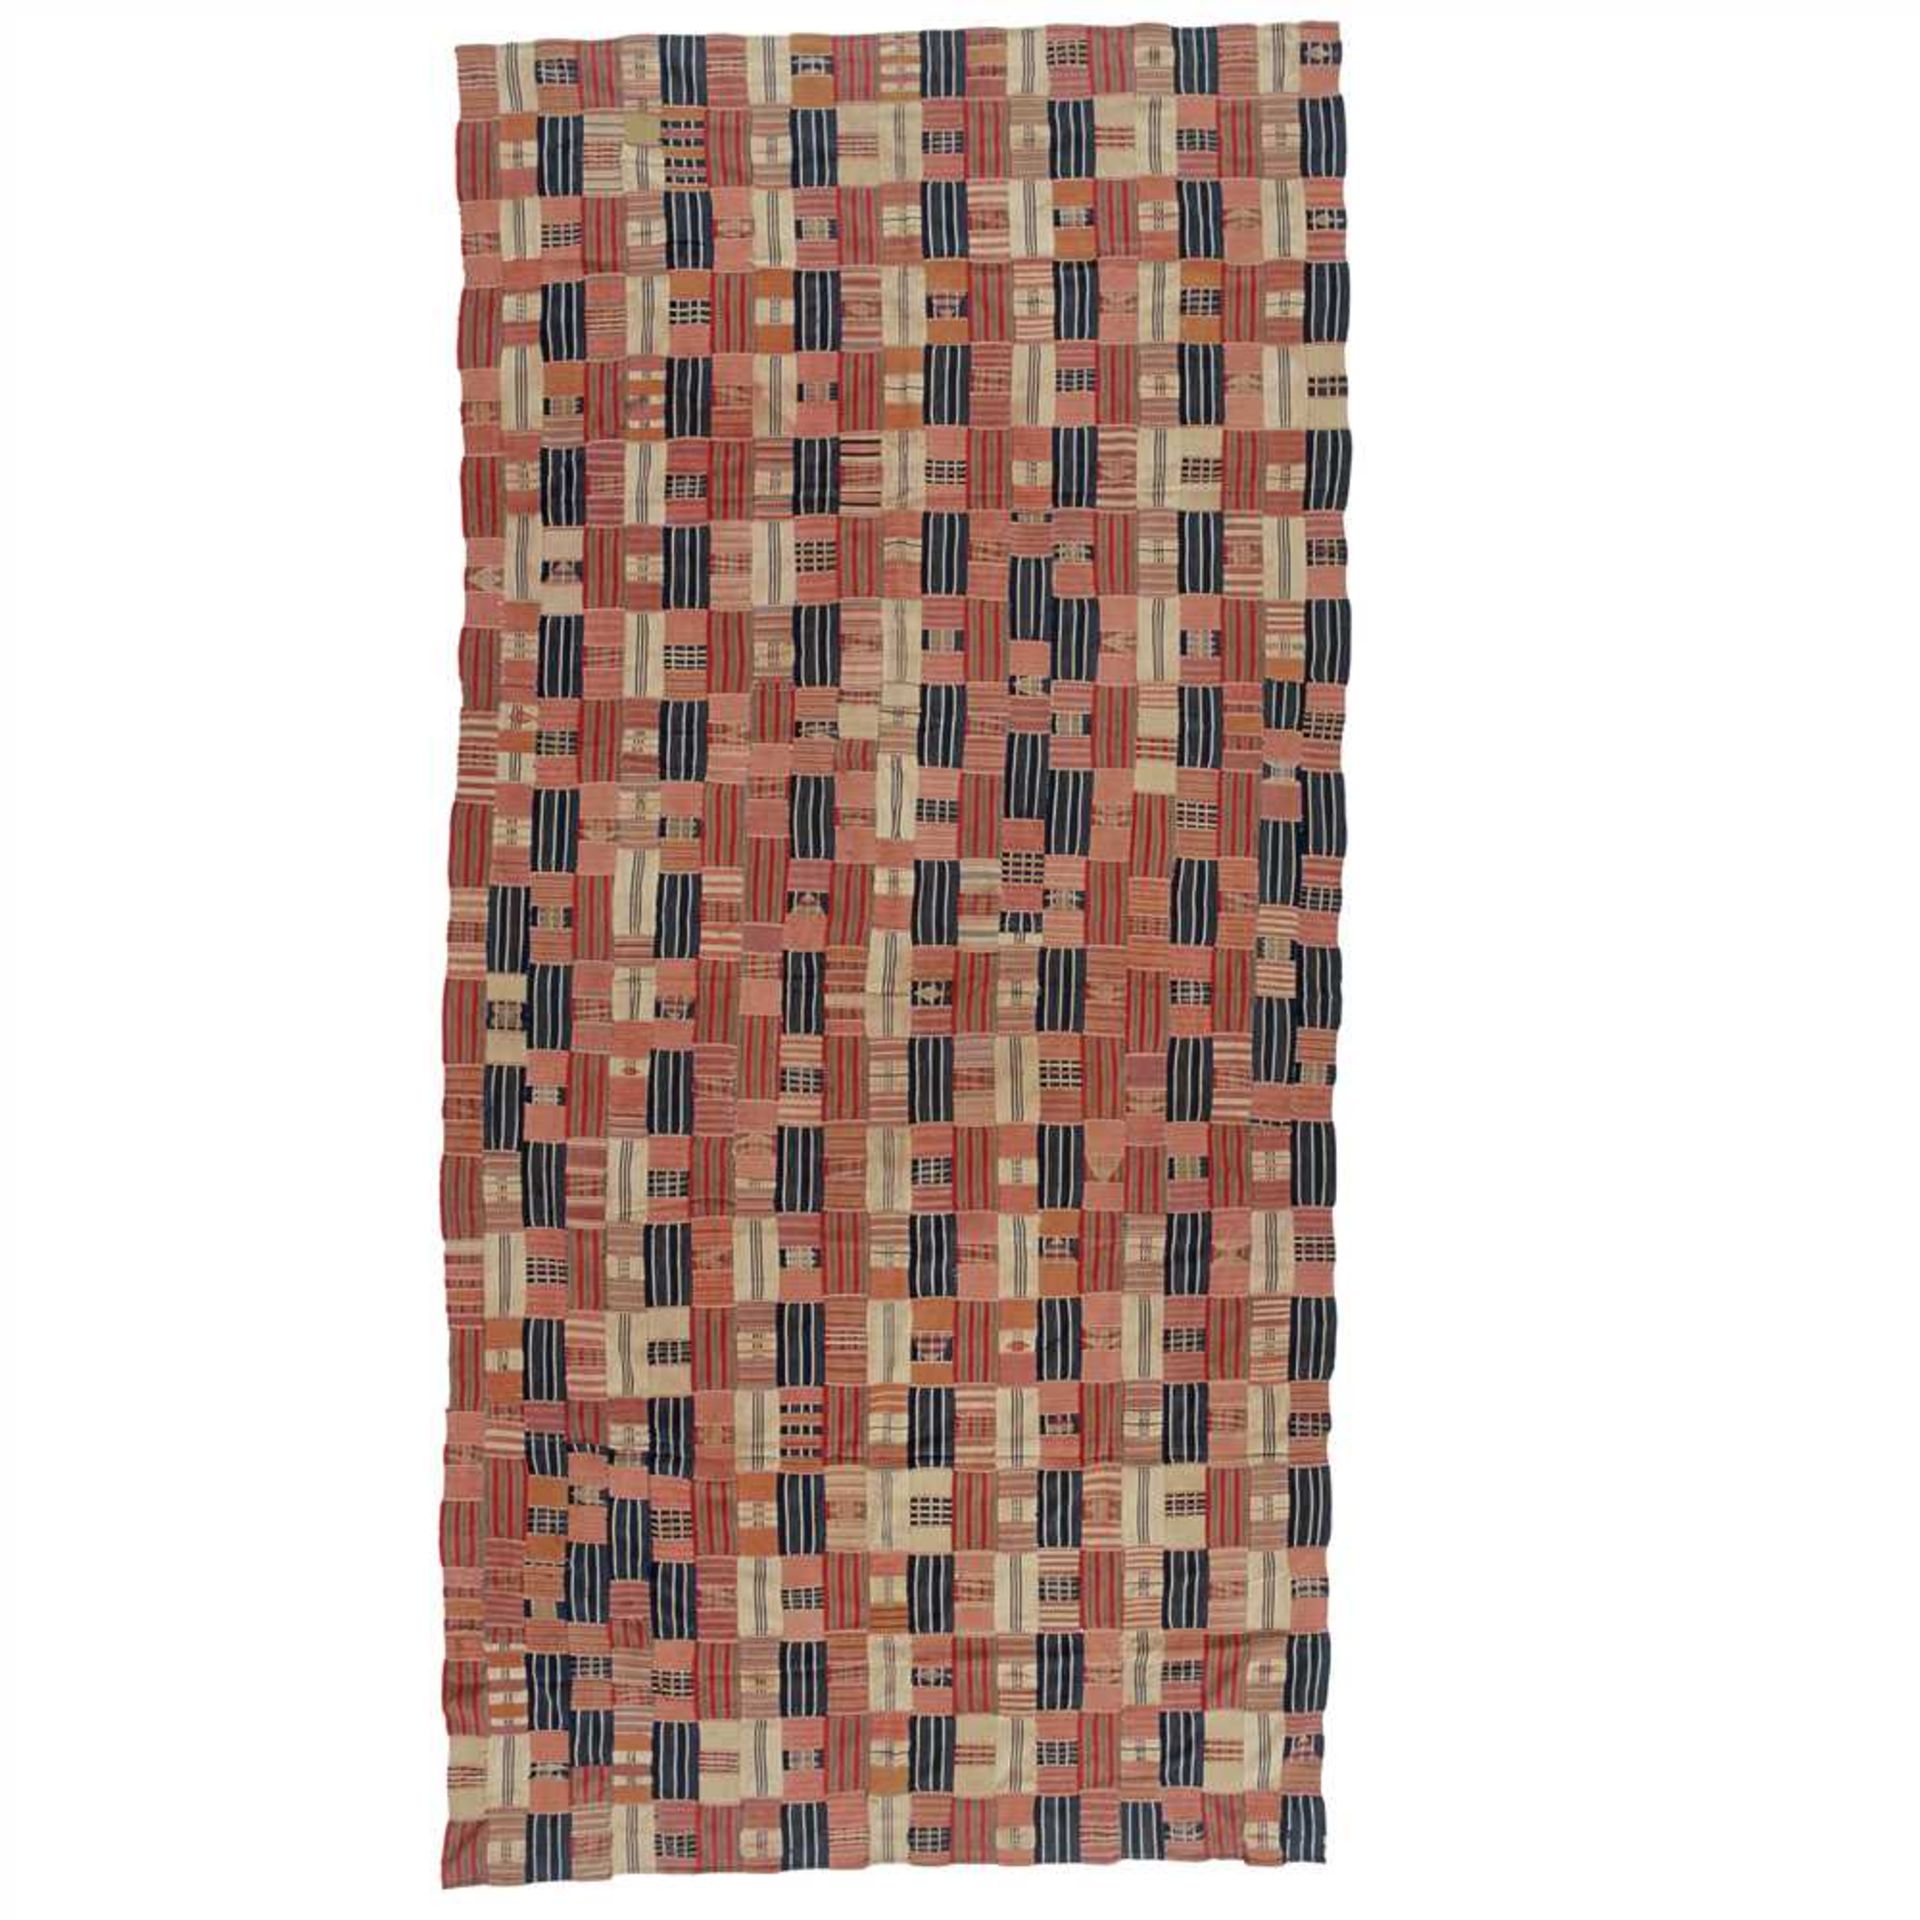 EWE KENTE CLOTH GHANA / TOGO cotton, with mixed strip patterns and woven designs of fish, combs